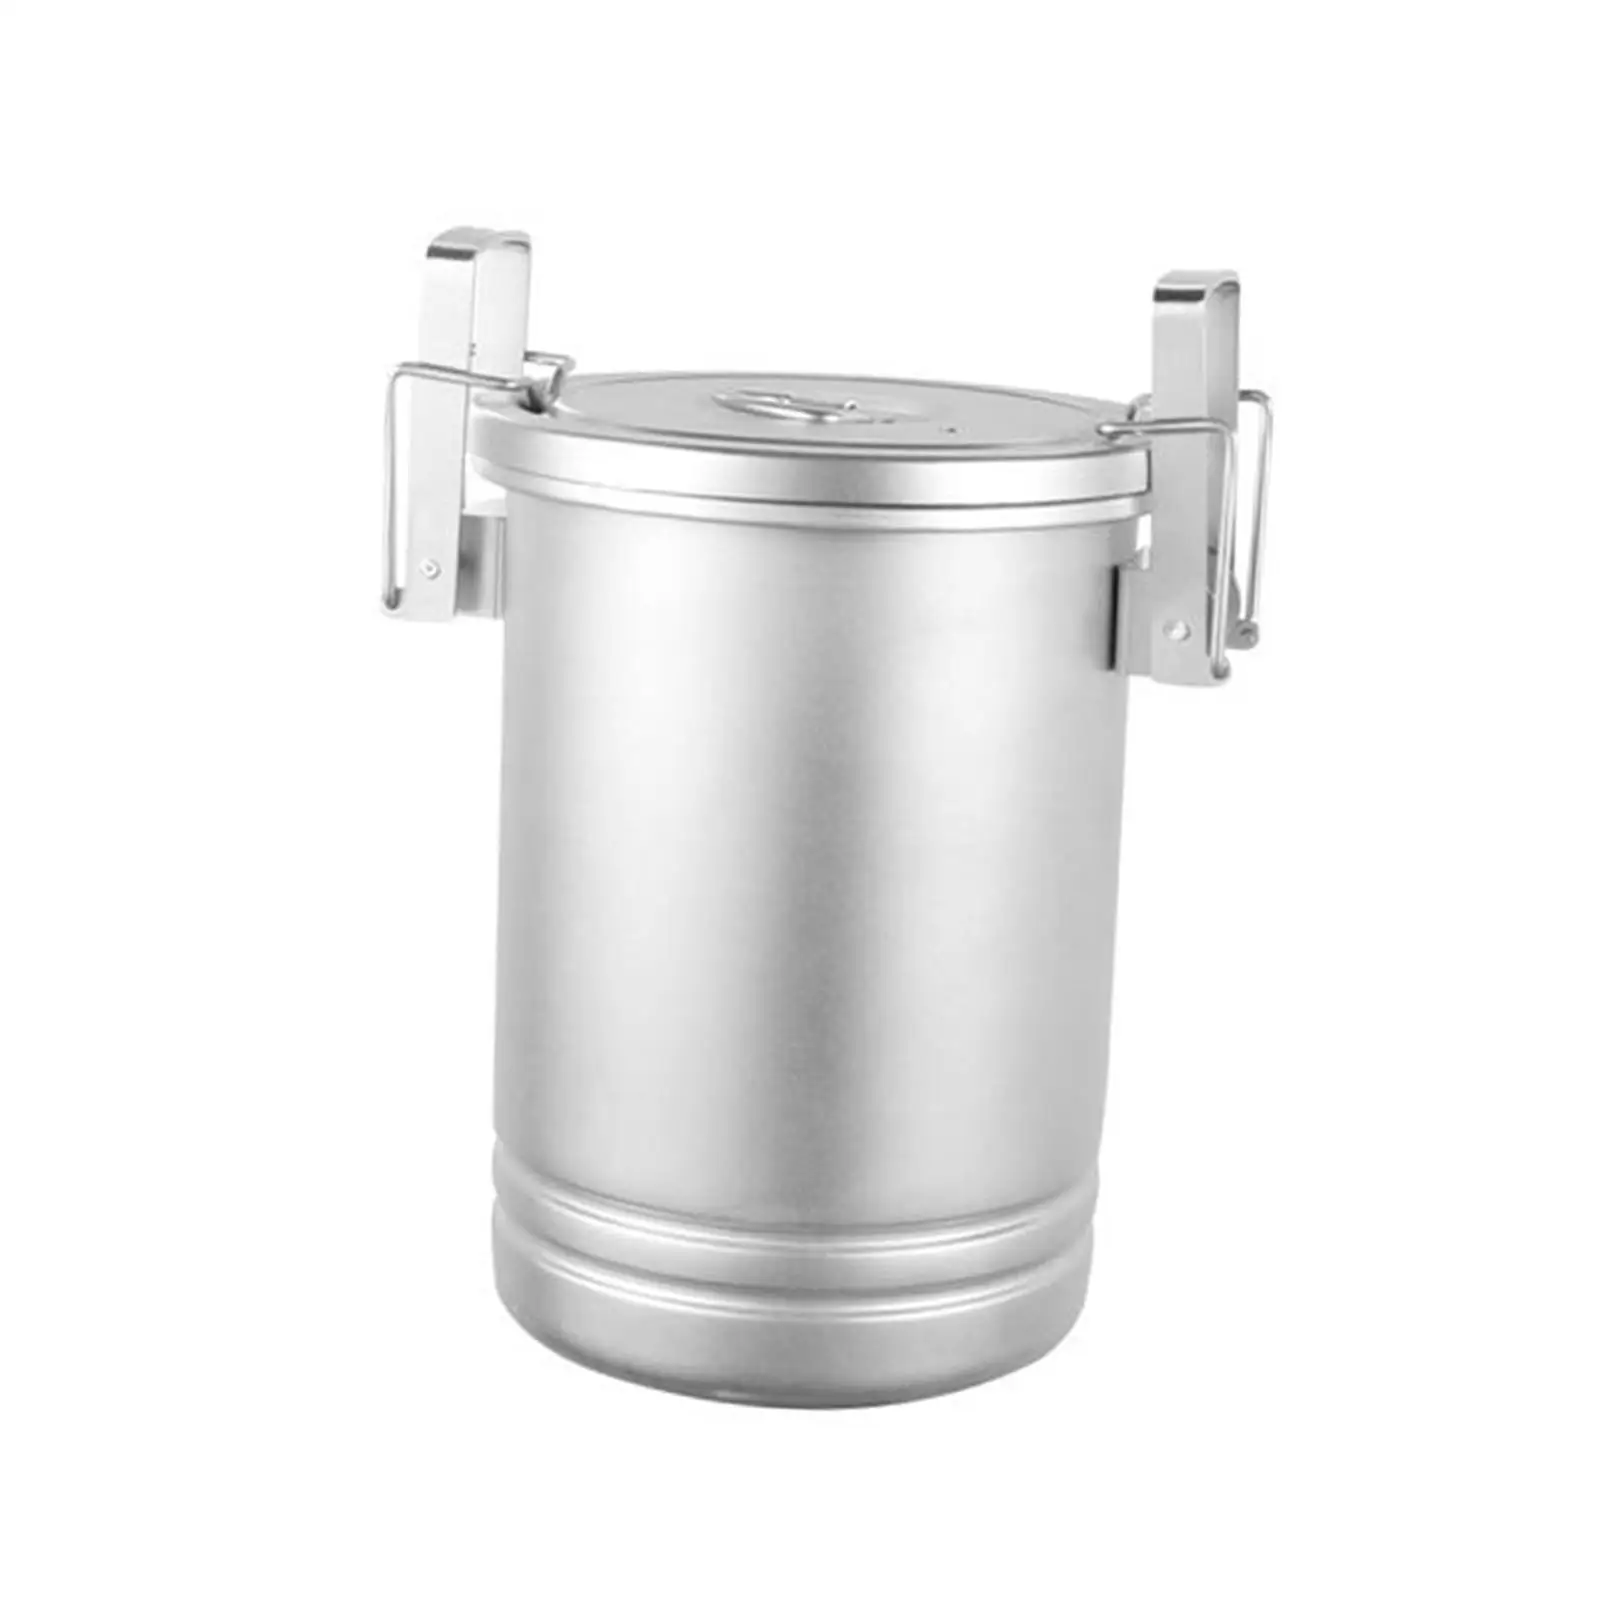 Cooking Pot Accessories Cooking with Lid Pot for Hiking Fishing Travel